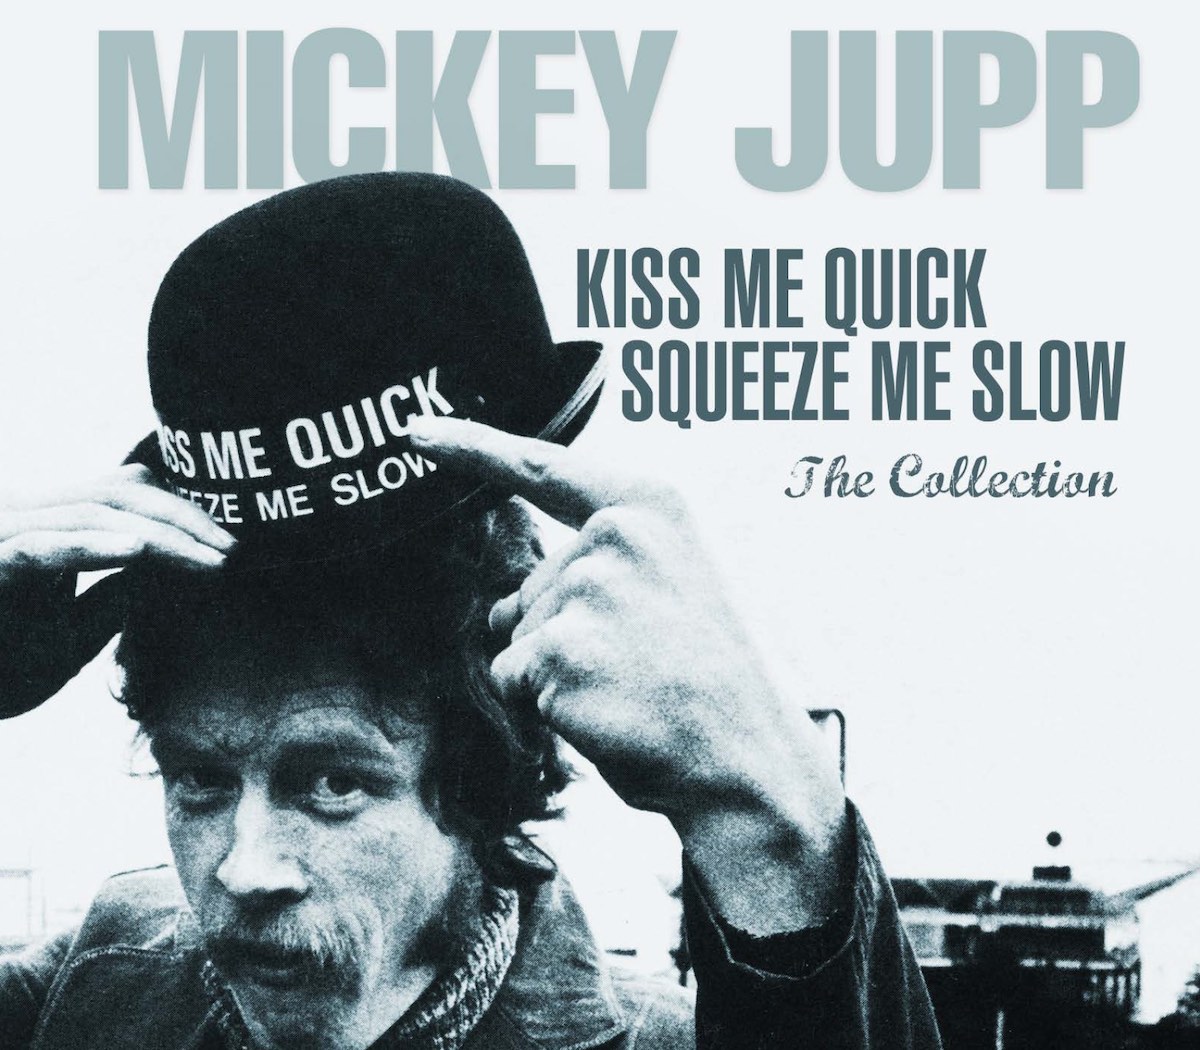 Kiss Me Quick, Squeeze Me Slow - The Collection